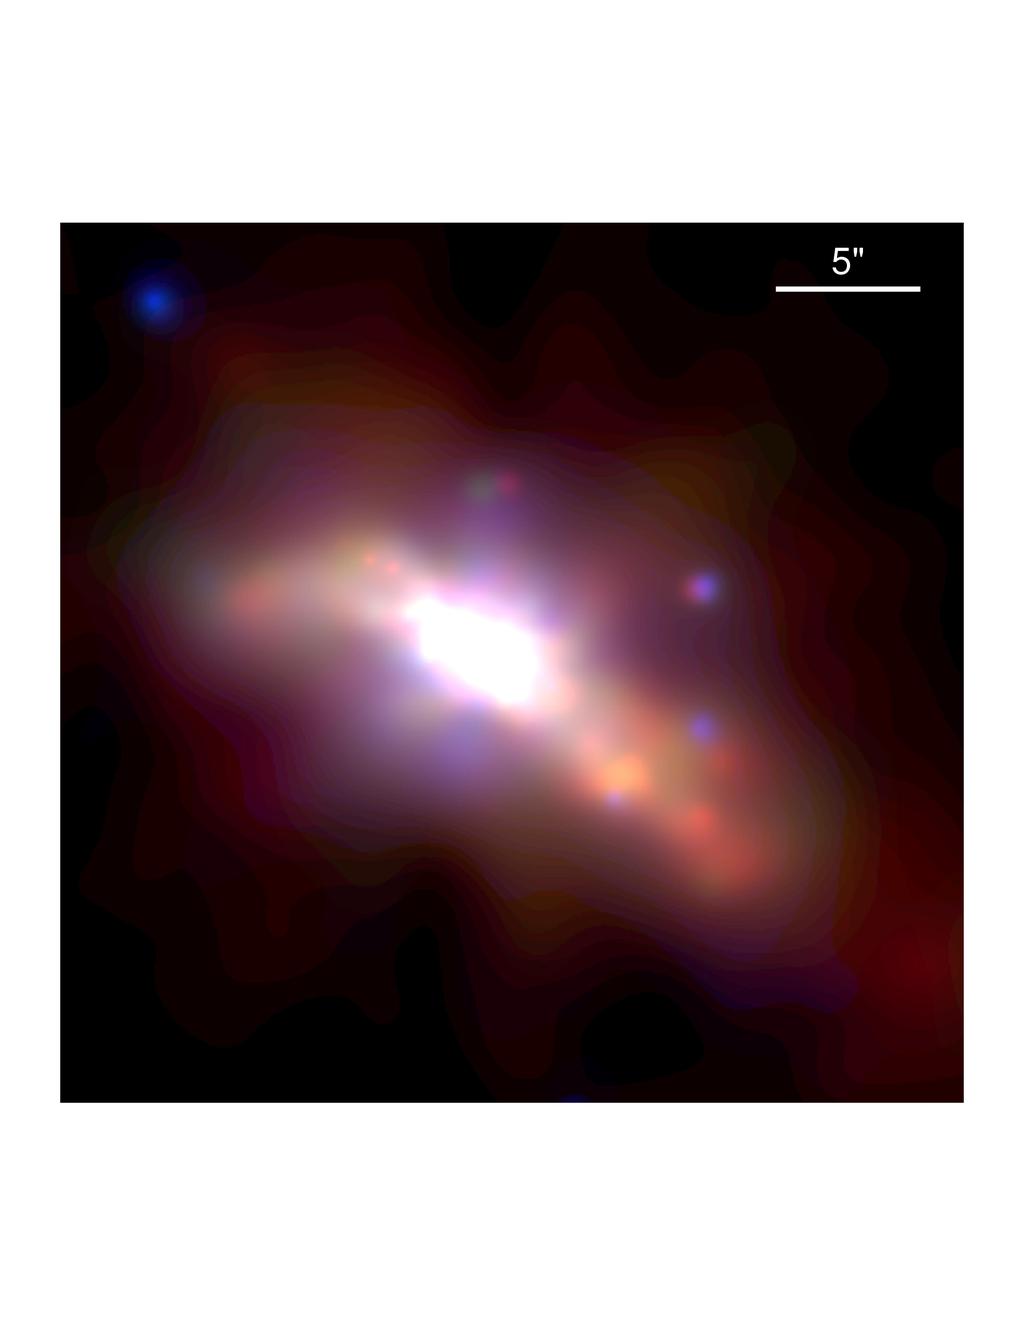 2010a) Extended soft X ray emission (Wang et al.